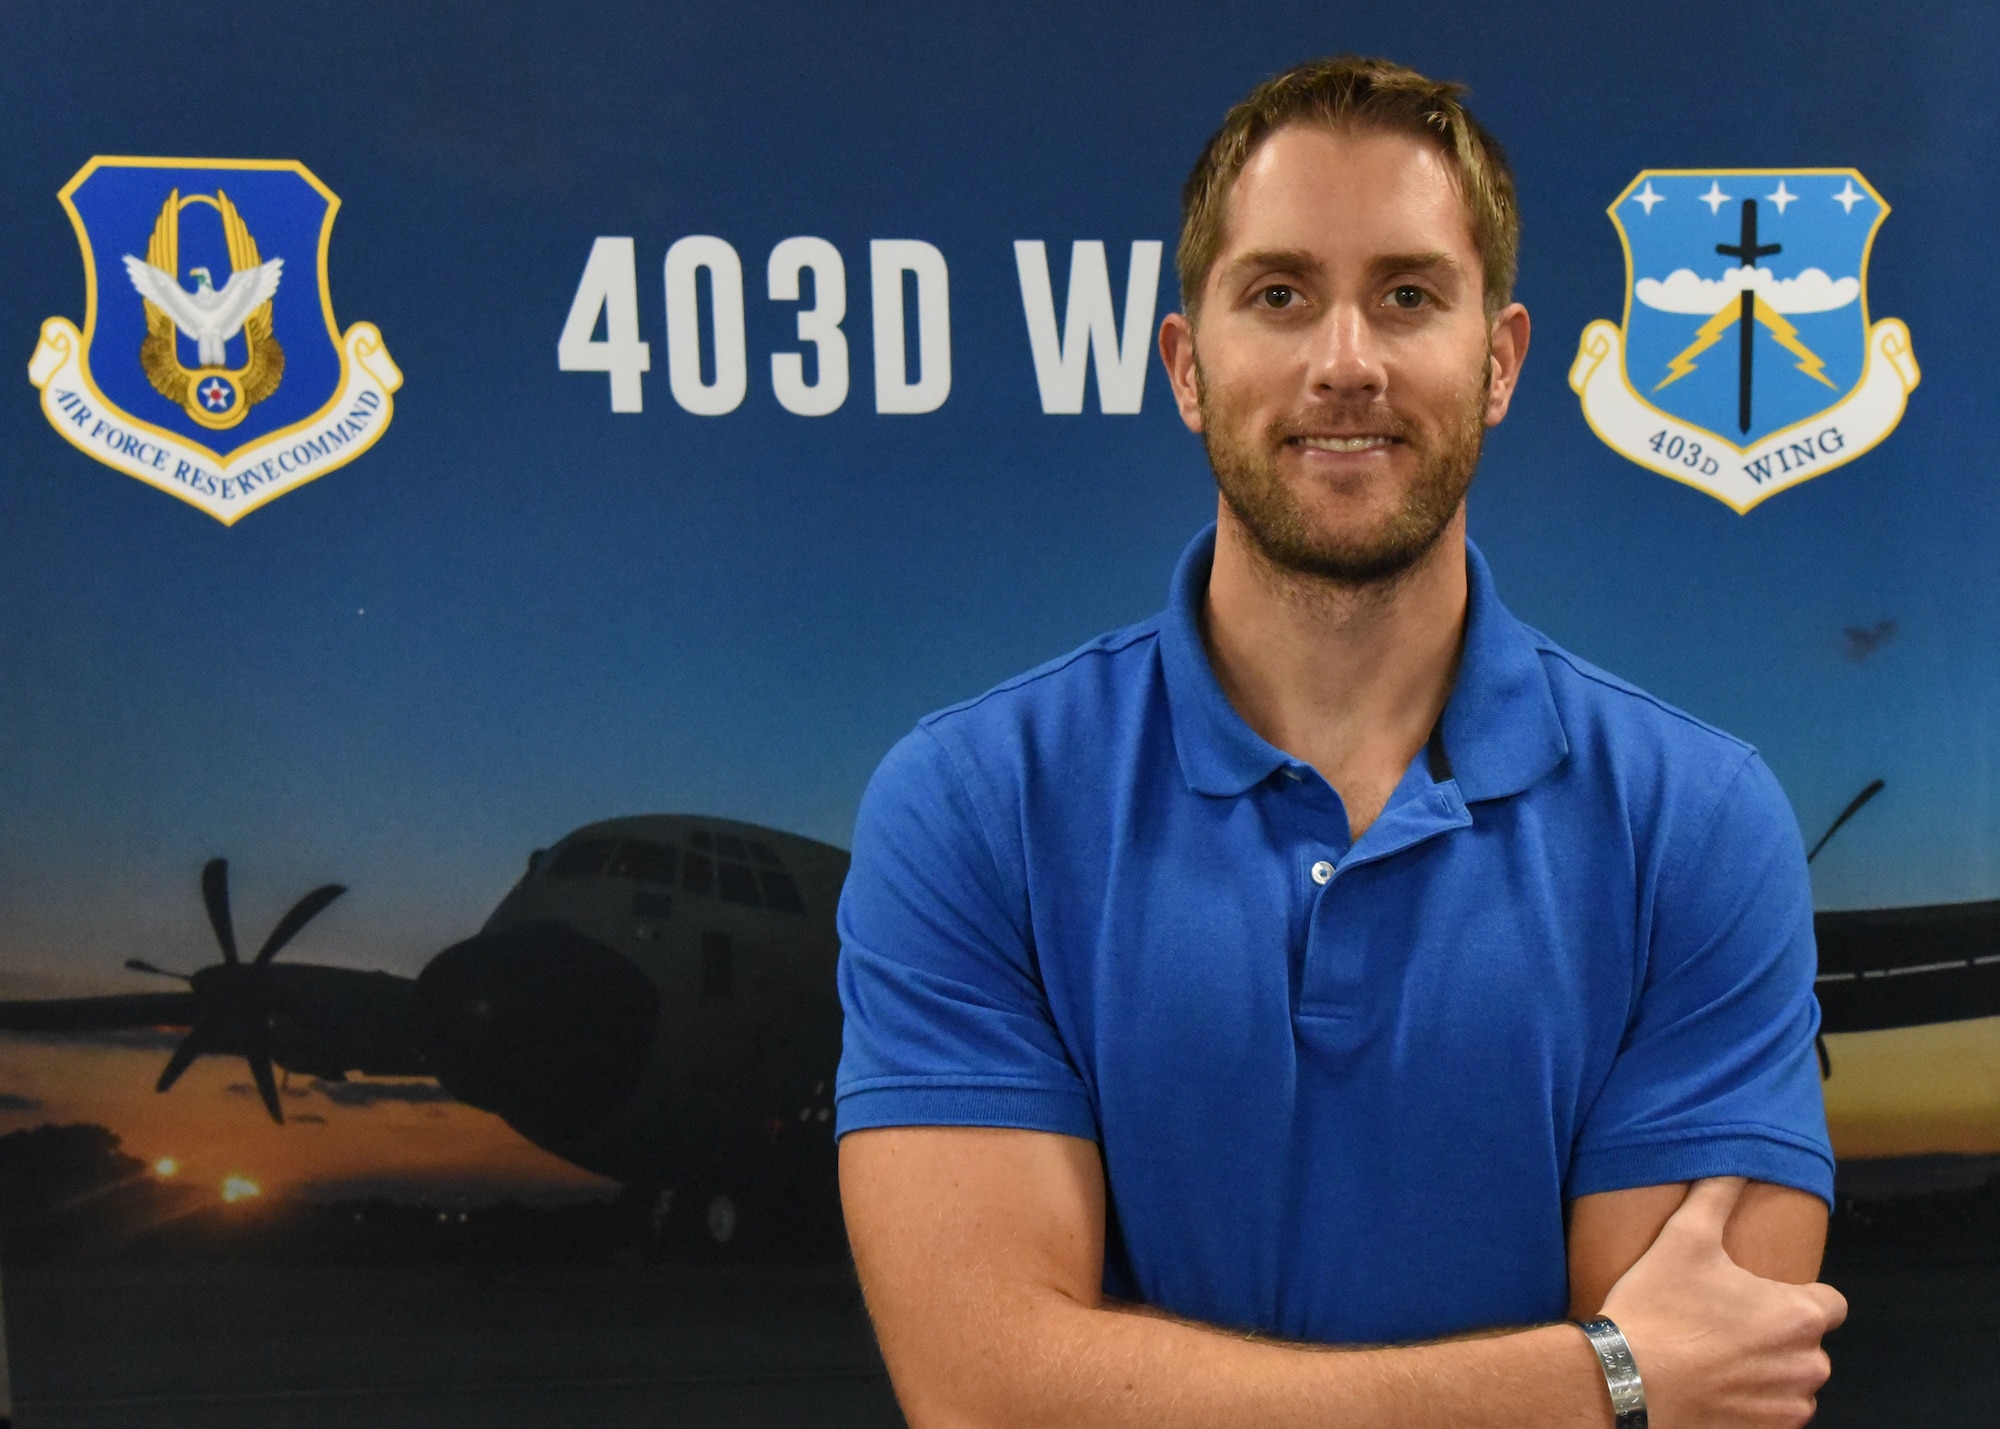 Dr. Justin J. Iverson is the 403rd Wing’s newest historian and the first full-time civil servant to hold the position. The 403rd Wing is an Air Force Reserve unit at Keesler Air Force Base, Mississippi. (U.S. Air Force photo/Lt. Col. Marnee A.C. Losurdo)